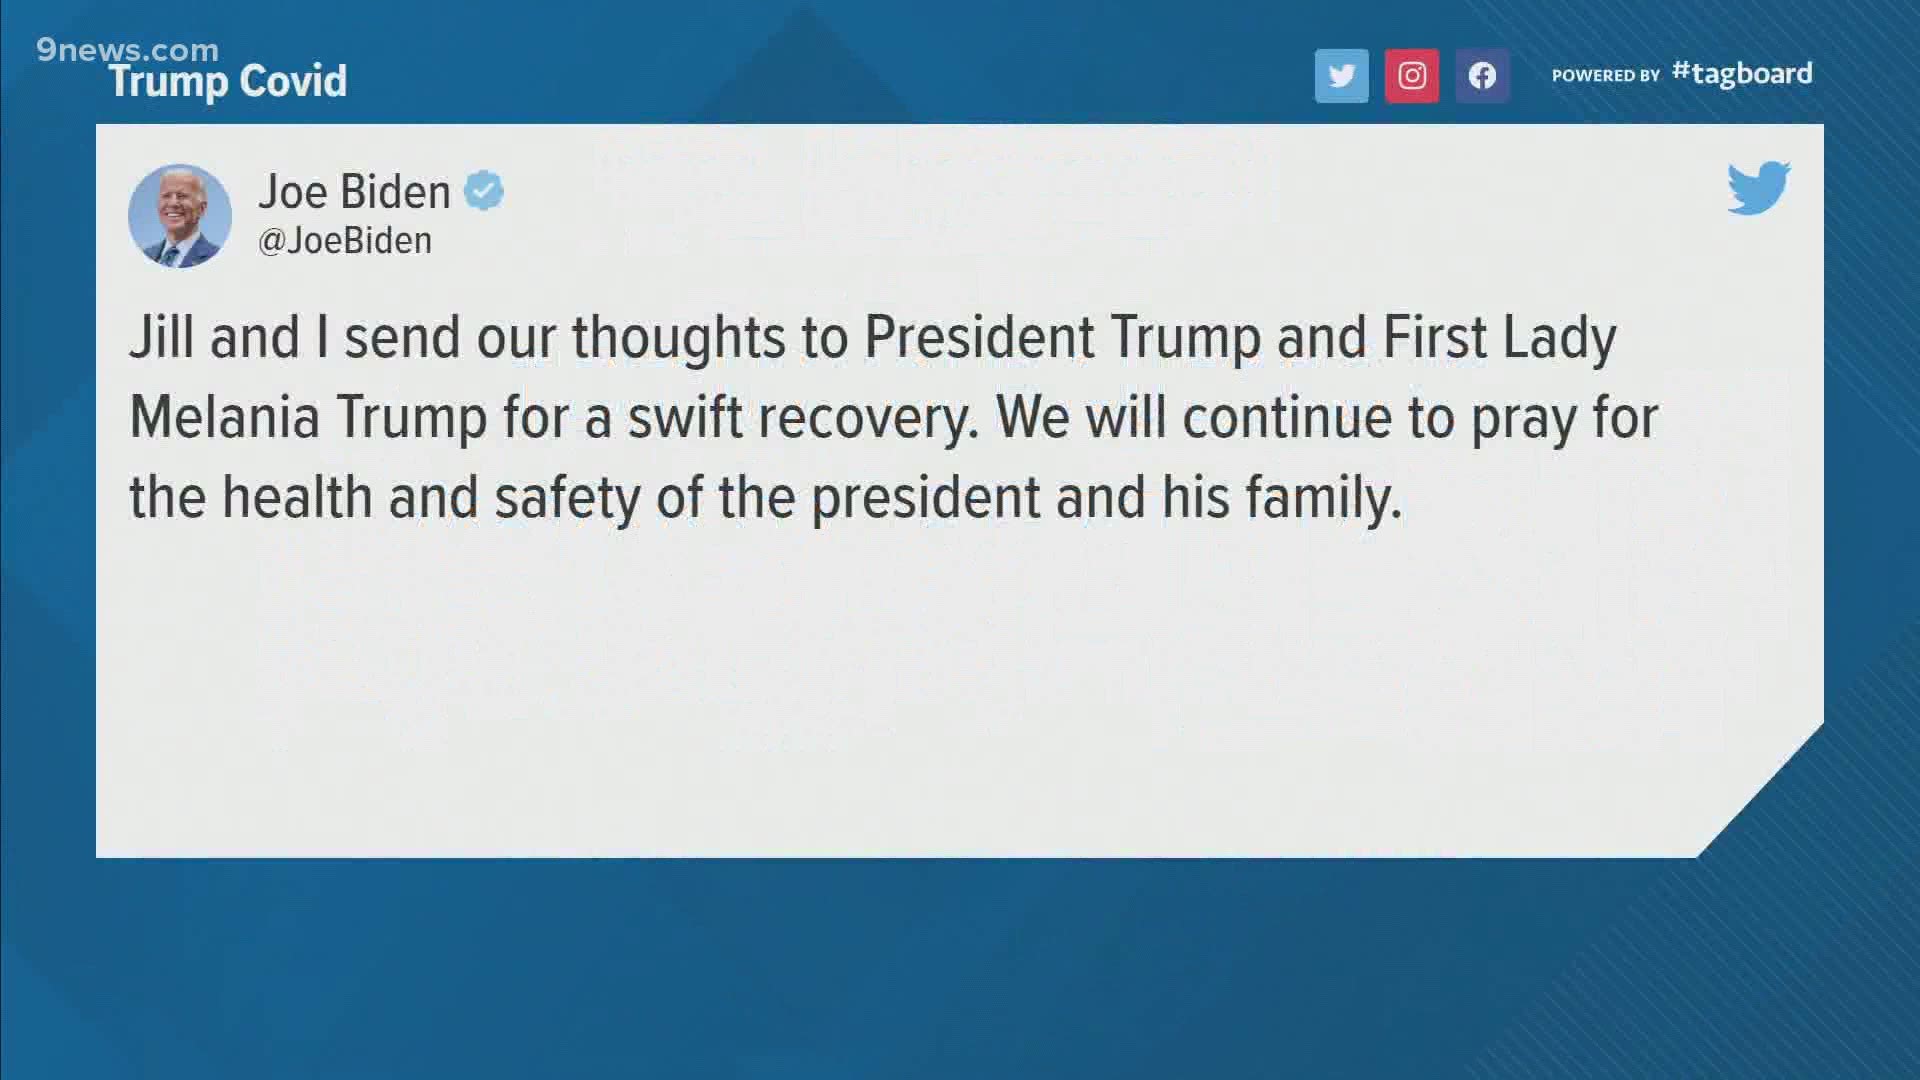 Joe Biden, Gov. Jared Polis (D-Colo.) and British Prime Minister Boris Johnson were among those wishing the president and the first lady well after their diagnosis.